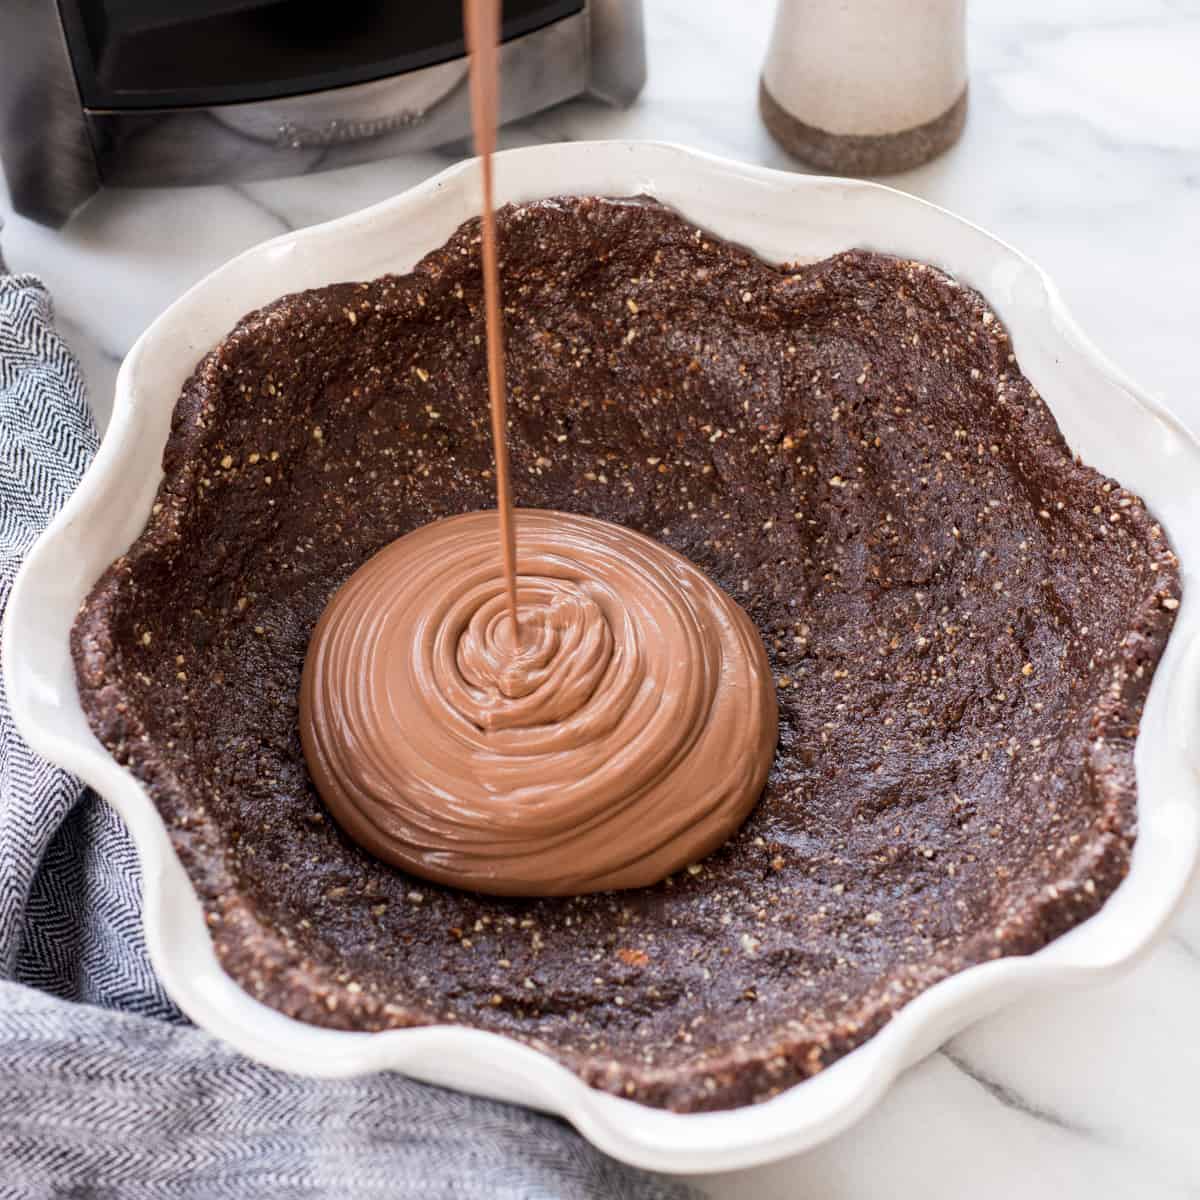 Vegan Chocolate Pie filling being poured into the crust